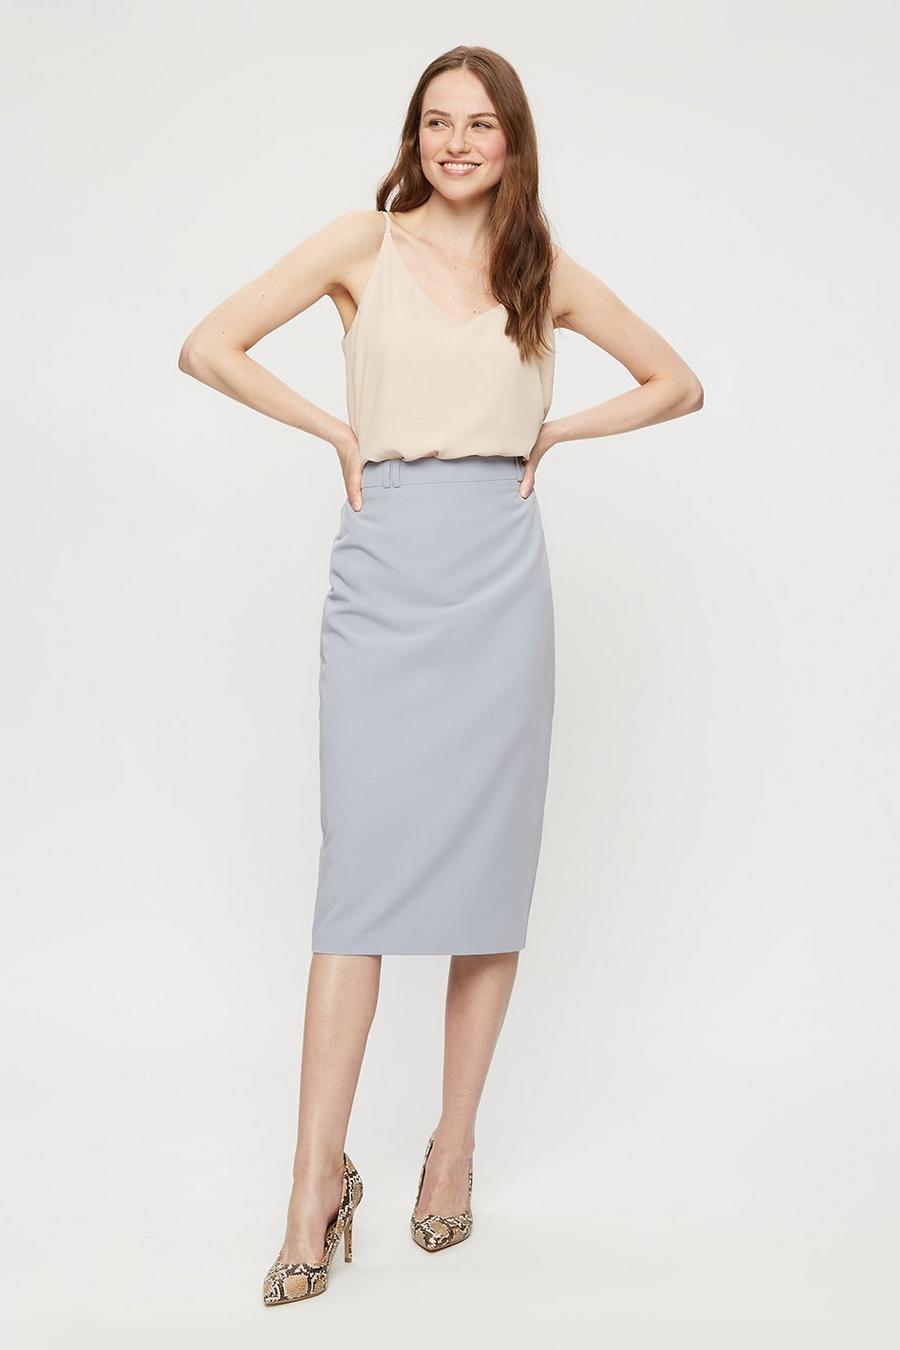 Silver Grey Tailored Pencil Skirt